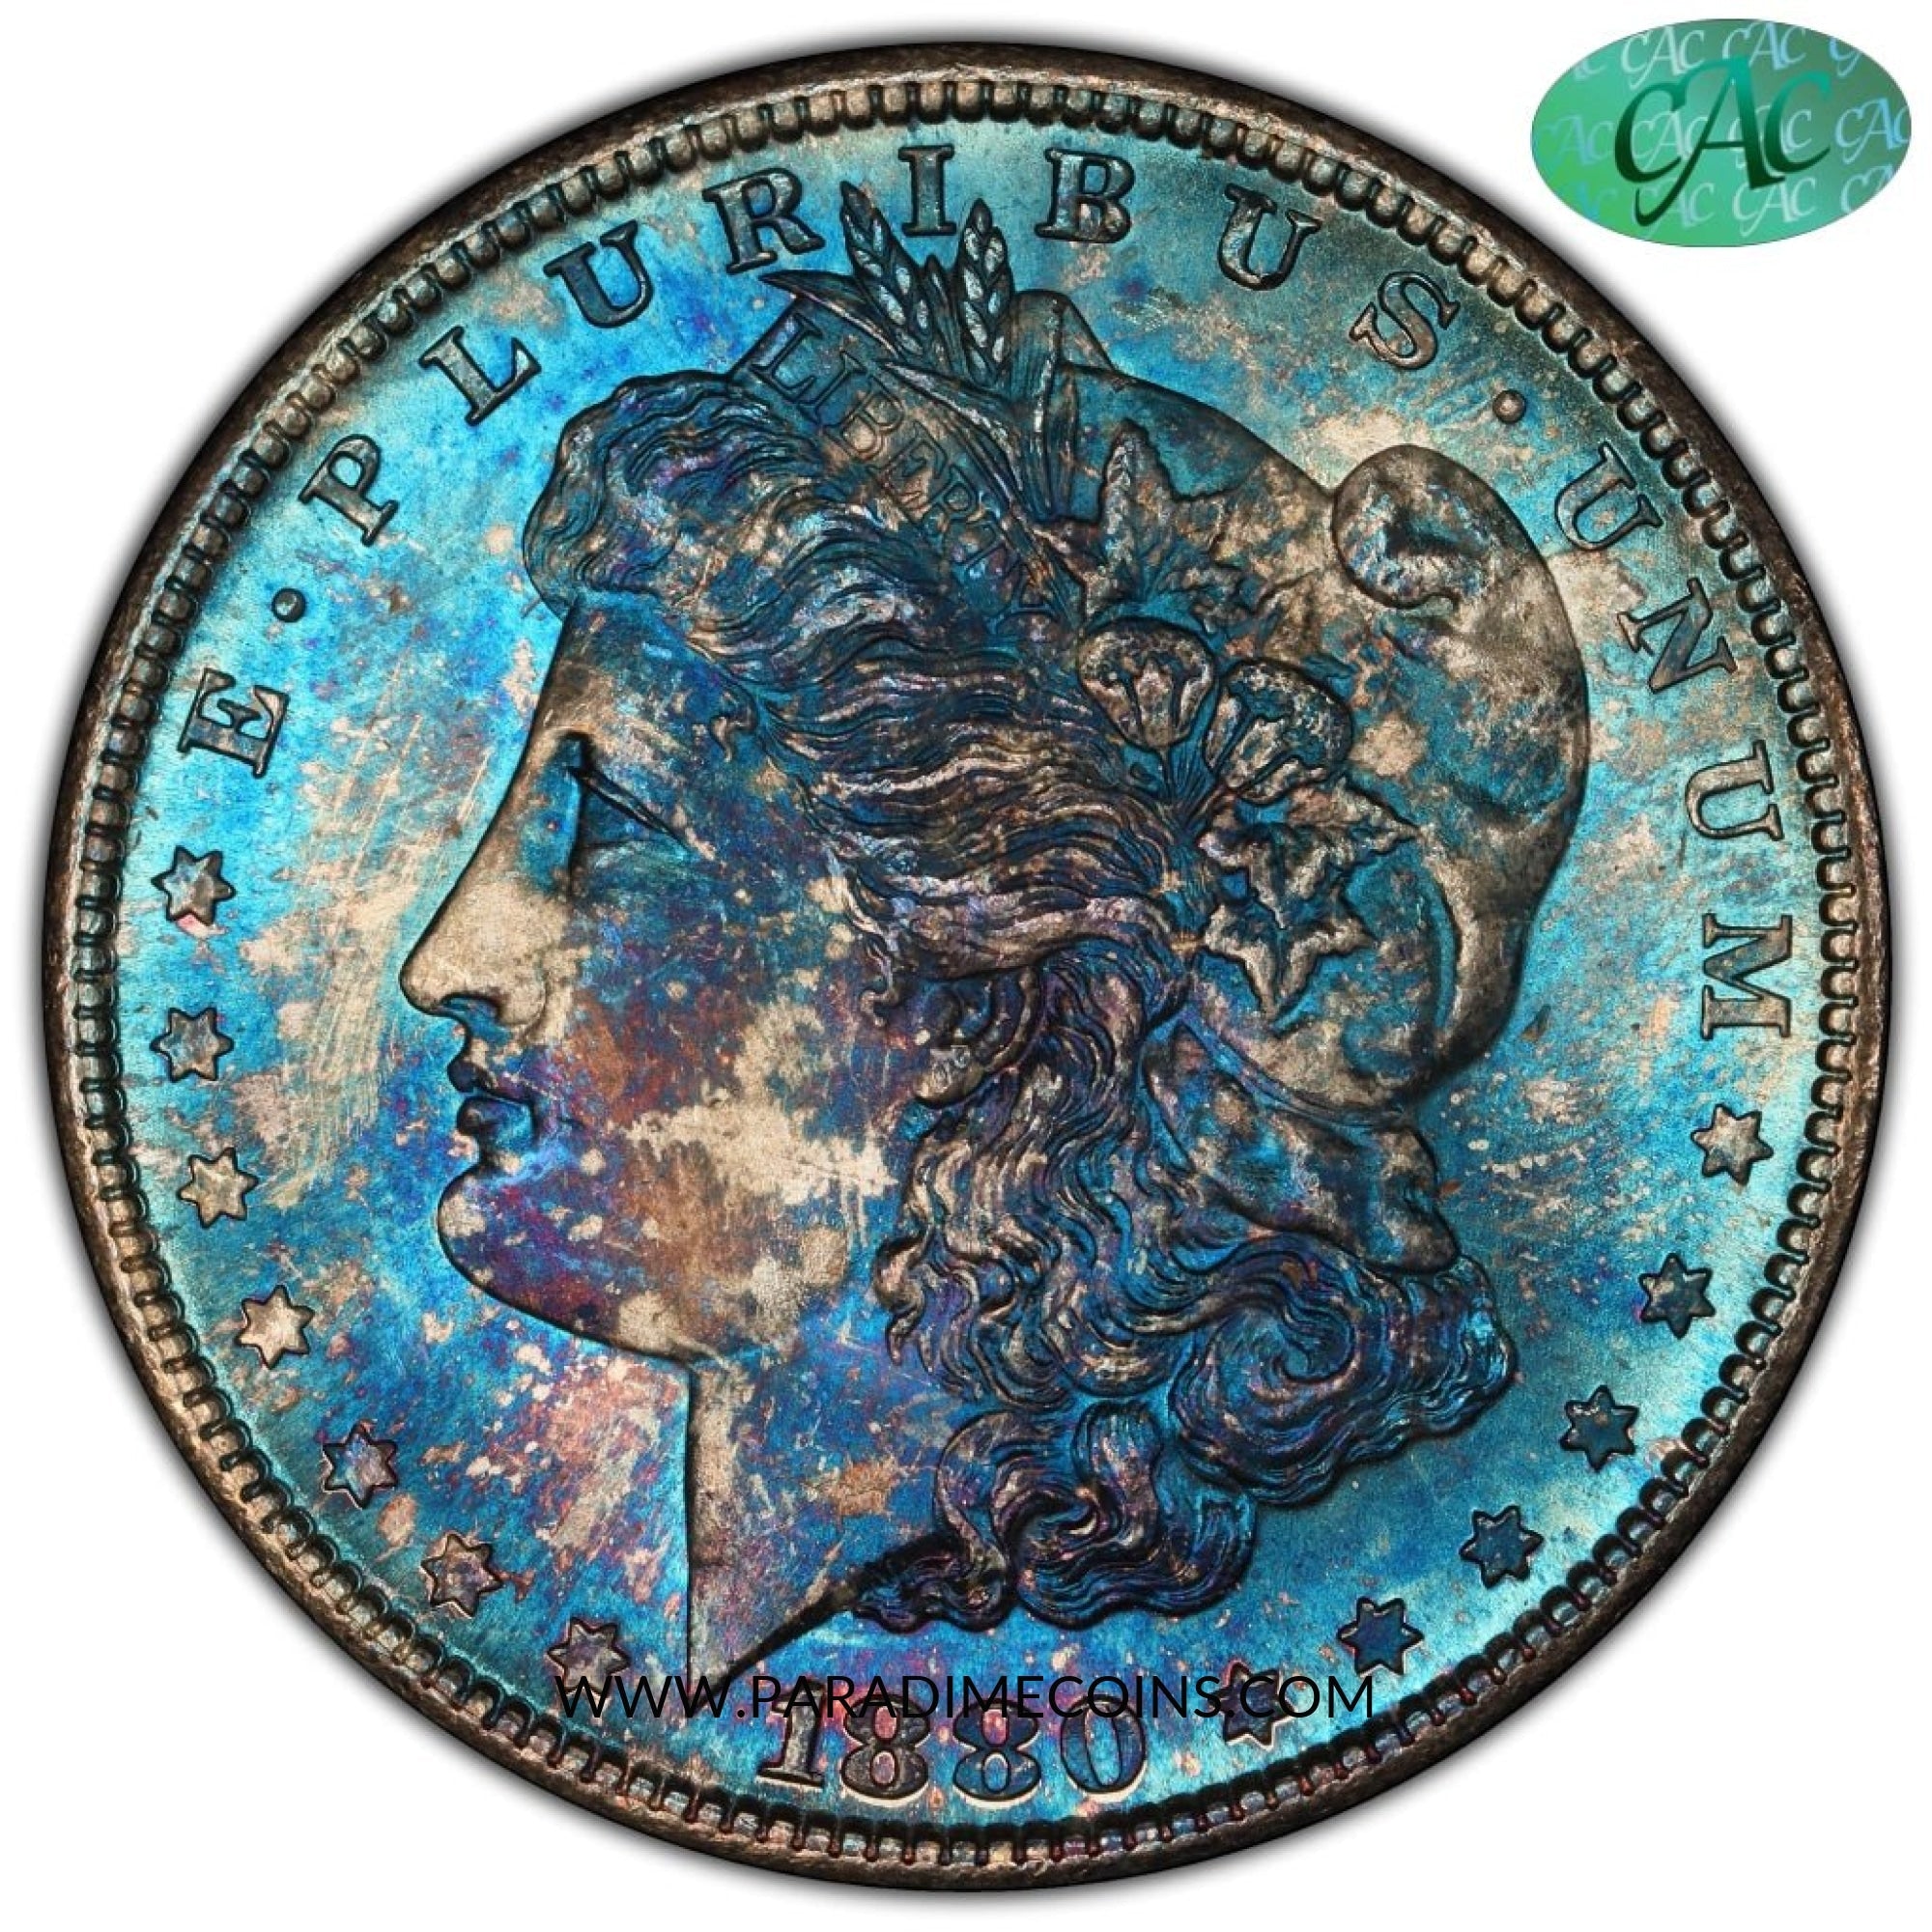 1880-S $1 MS65 PCGS CAC - Paradime Coins | PCGS NGC CACG CAC Rare US Numismatic Coins For Sale